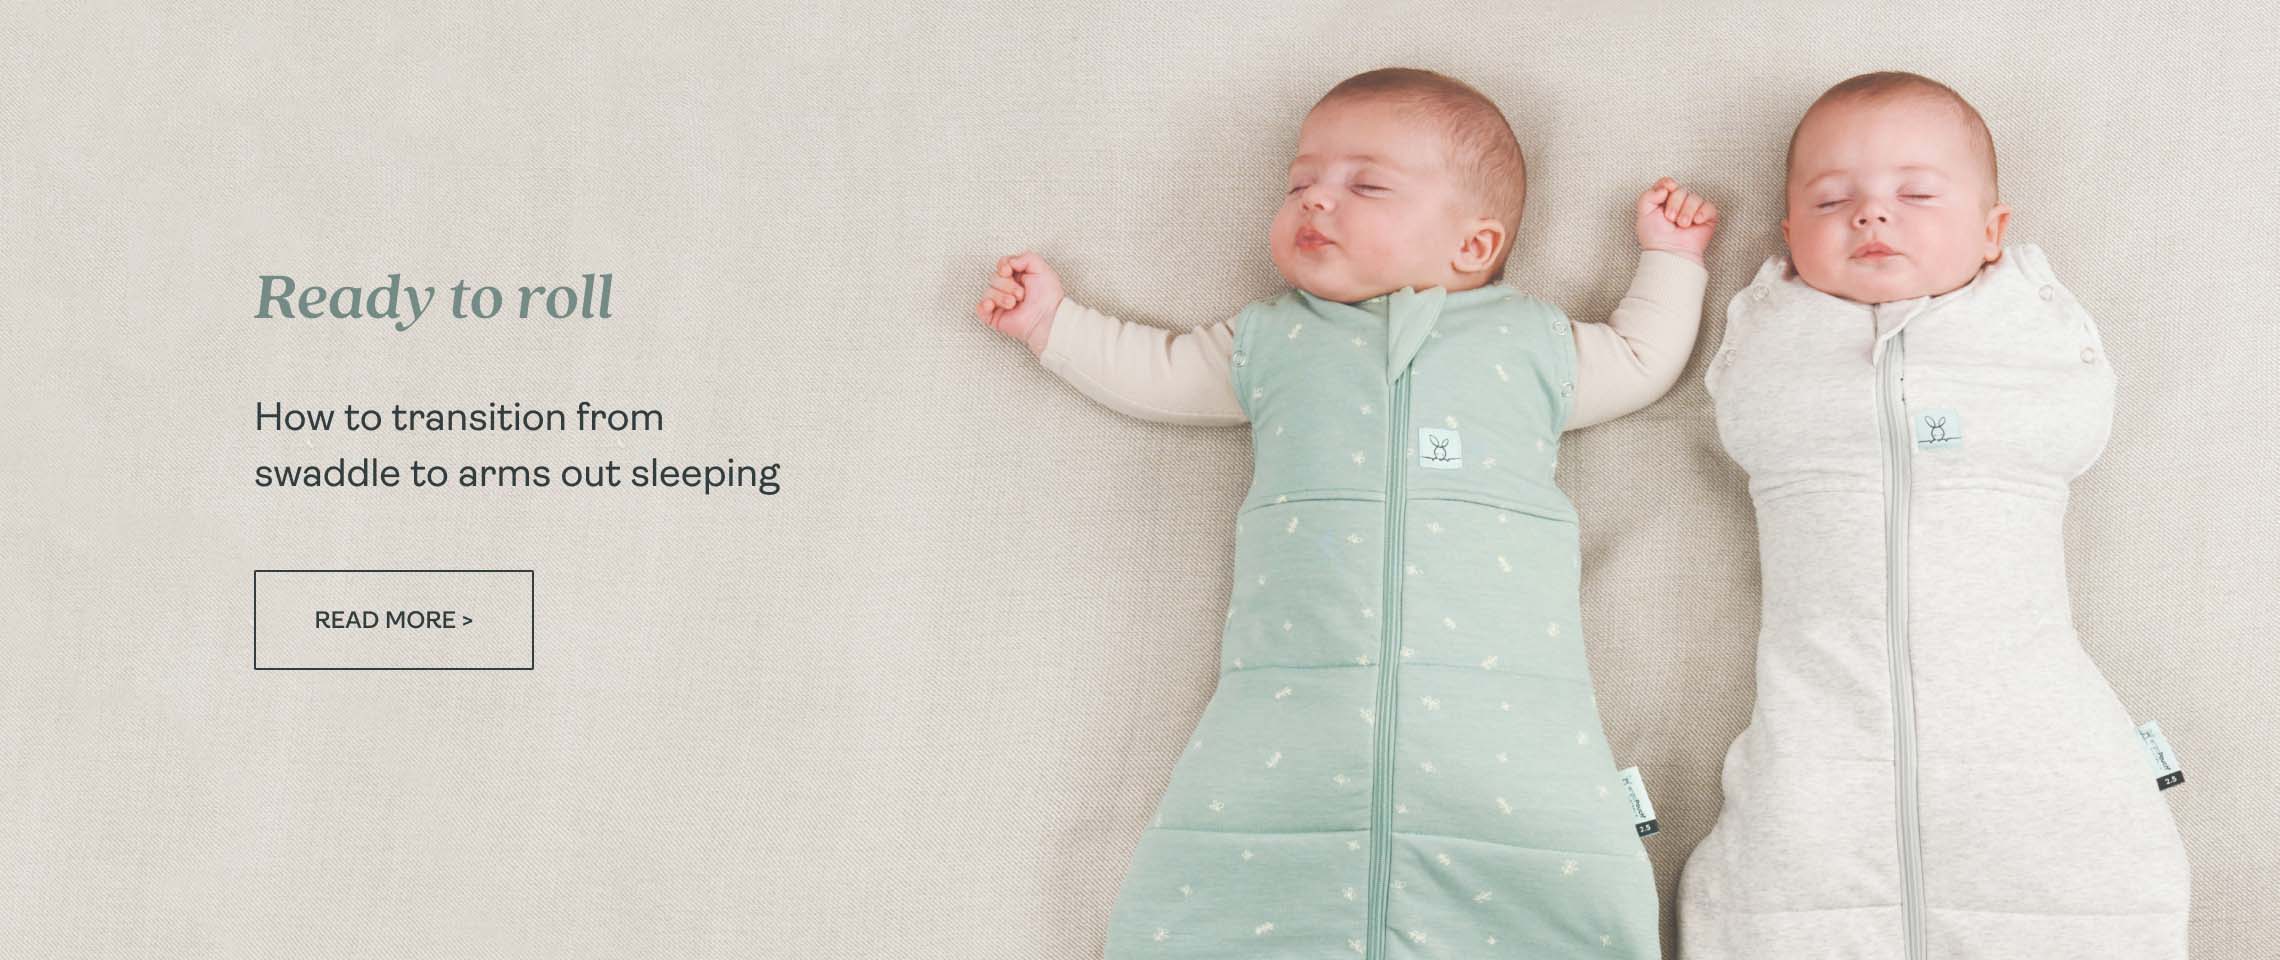 How to transition from swaddle to arms-out sleeping when baby starts rolling